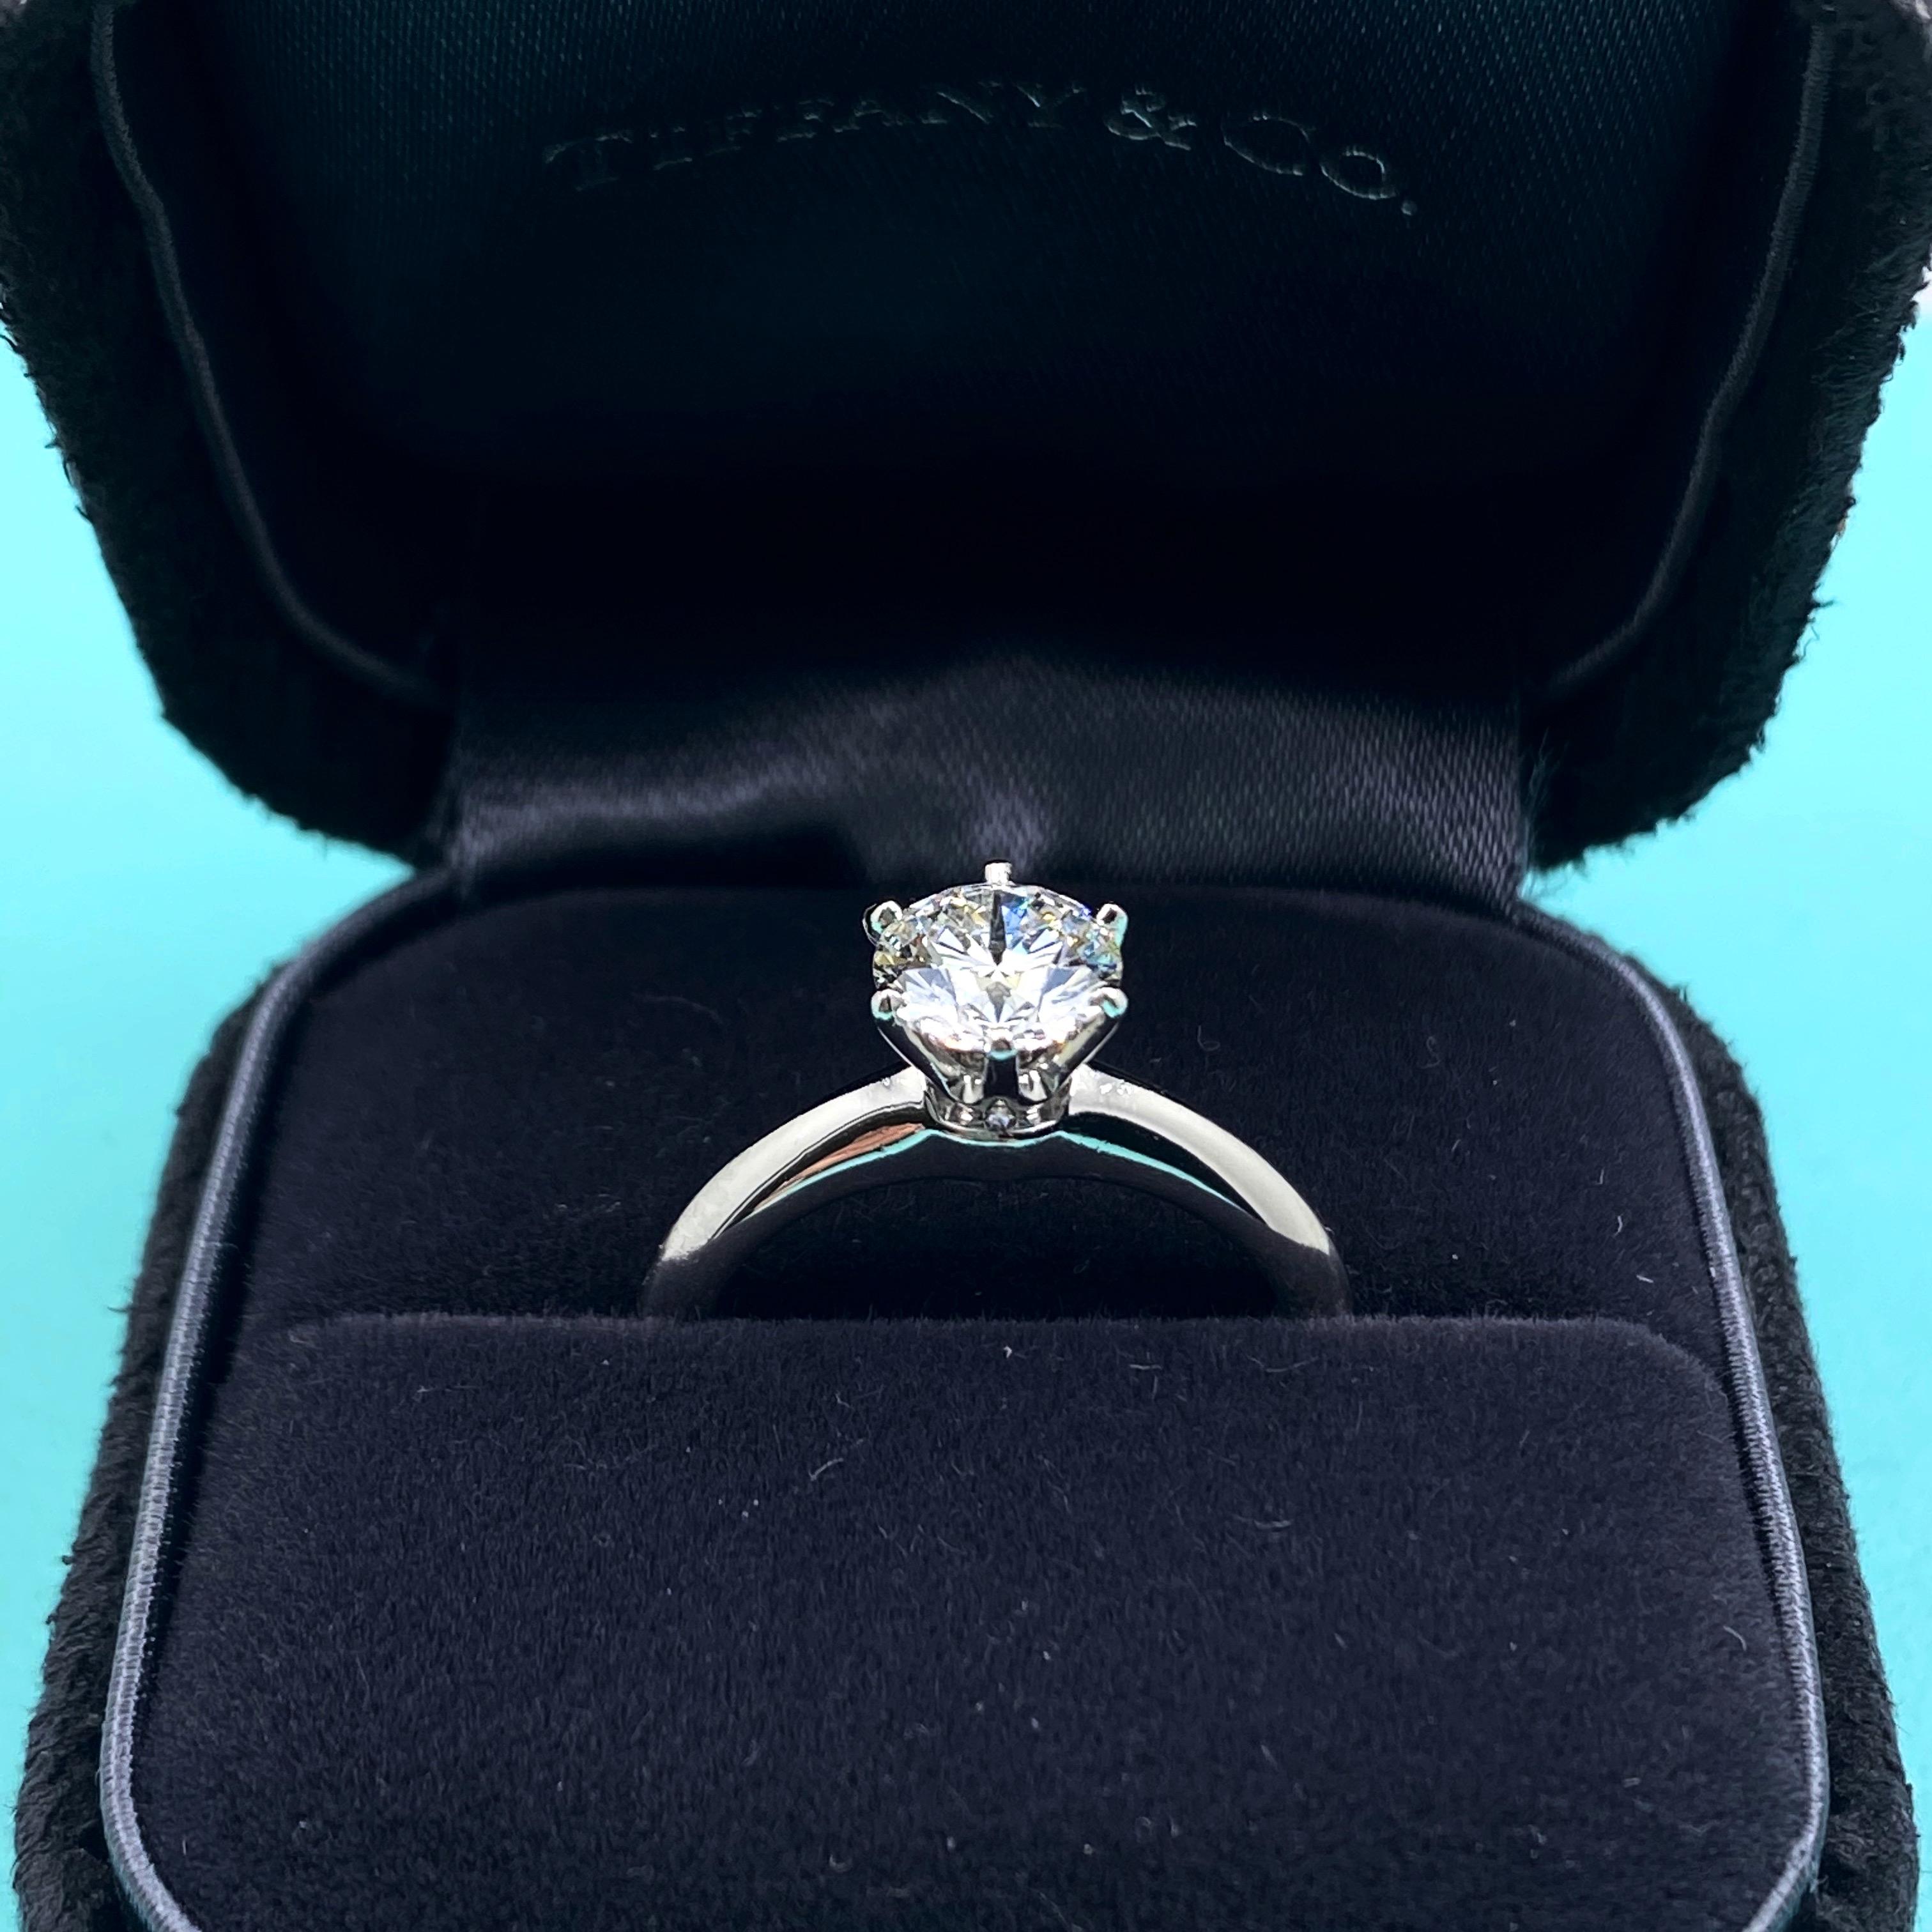 Tiffany & Co. Round Diamond 1.03 Carat G VS1 Solitaire Ring in Platinum For Sale 2